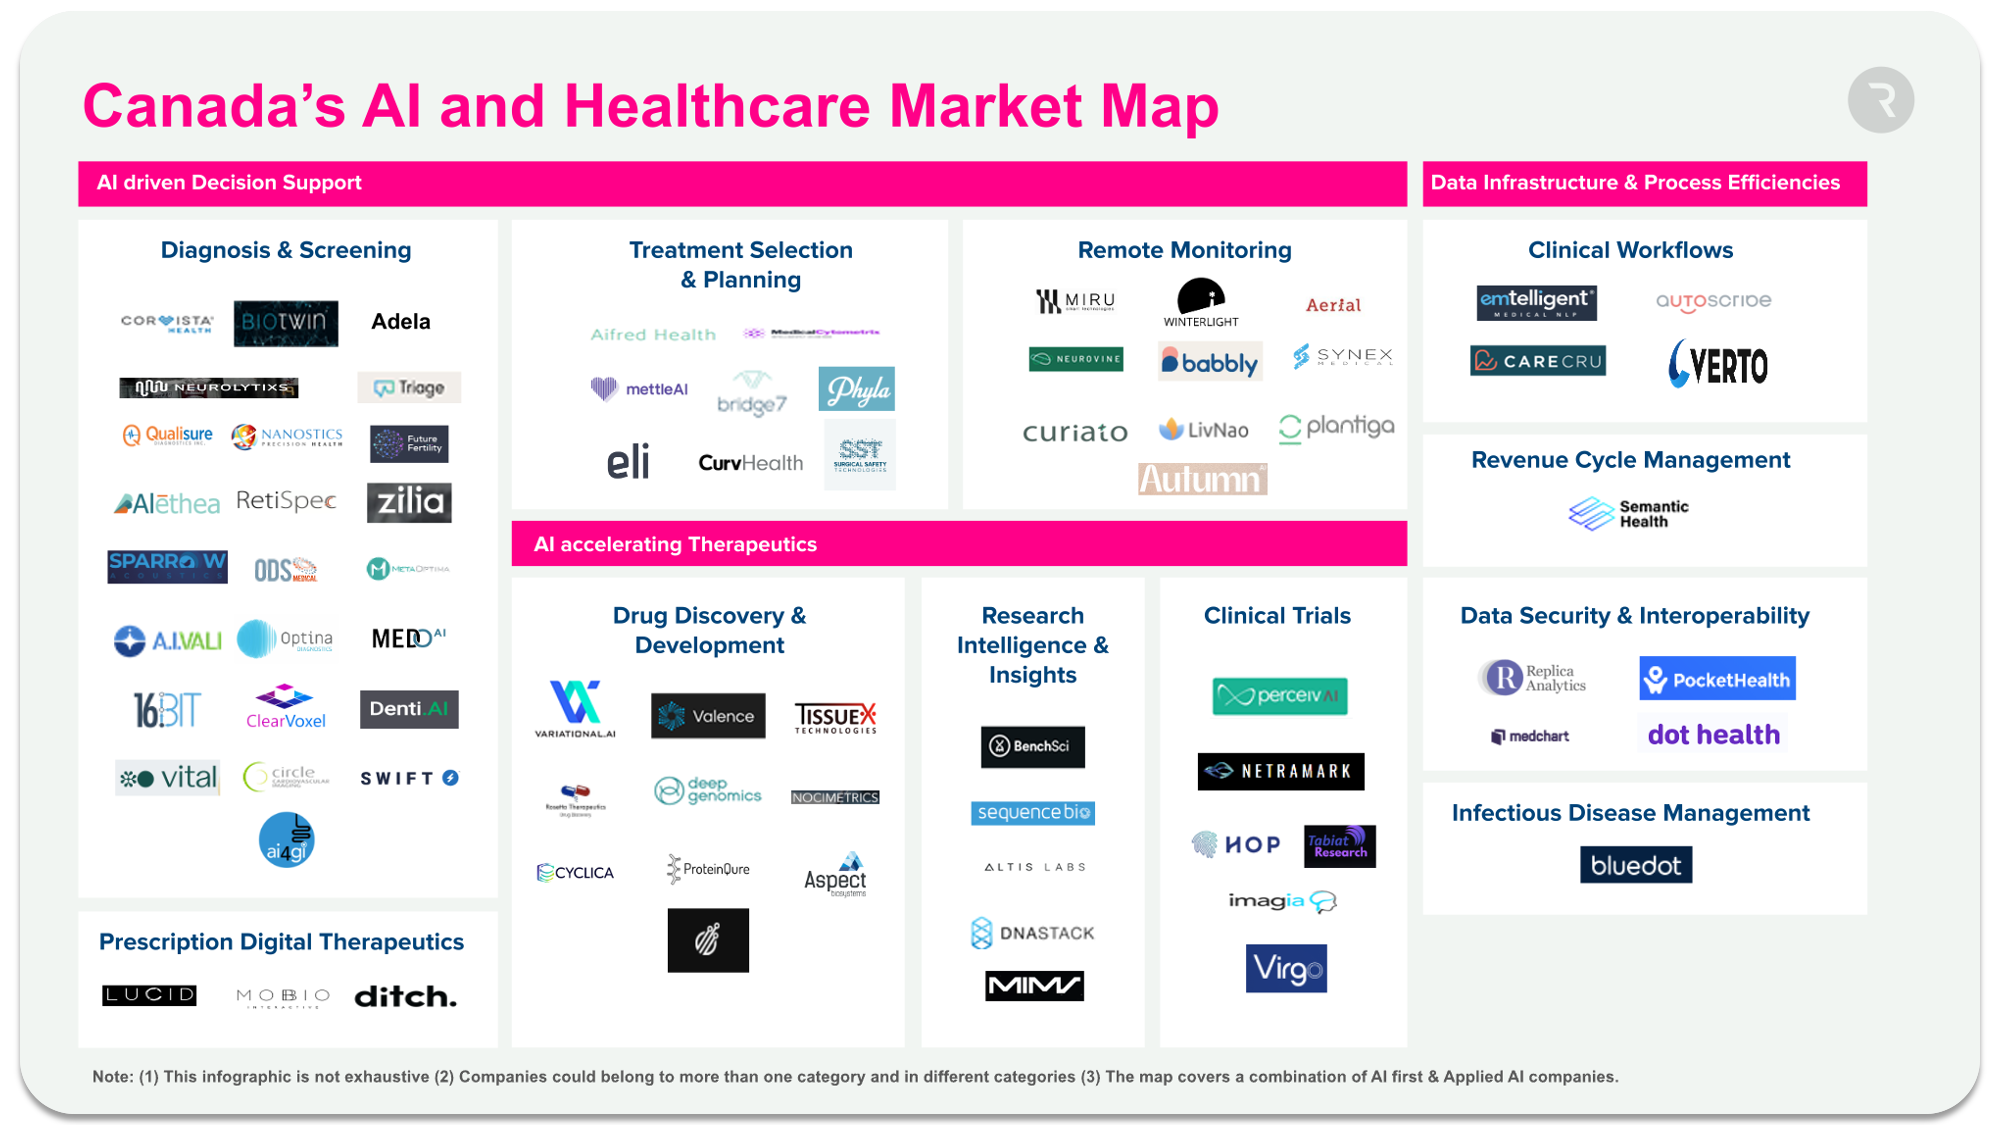 http://The%20First%20Canadian%20AI%20and%20Healthcare%20Market%20Map